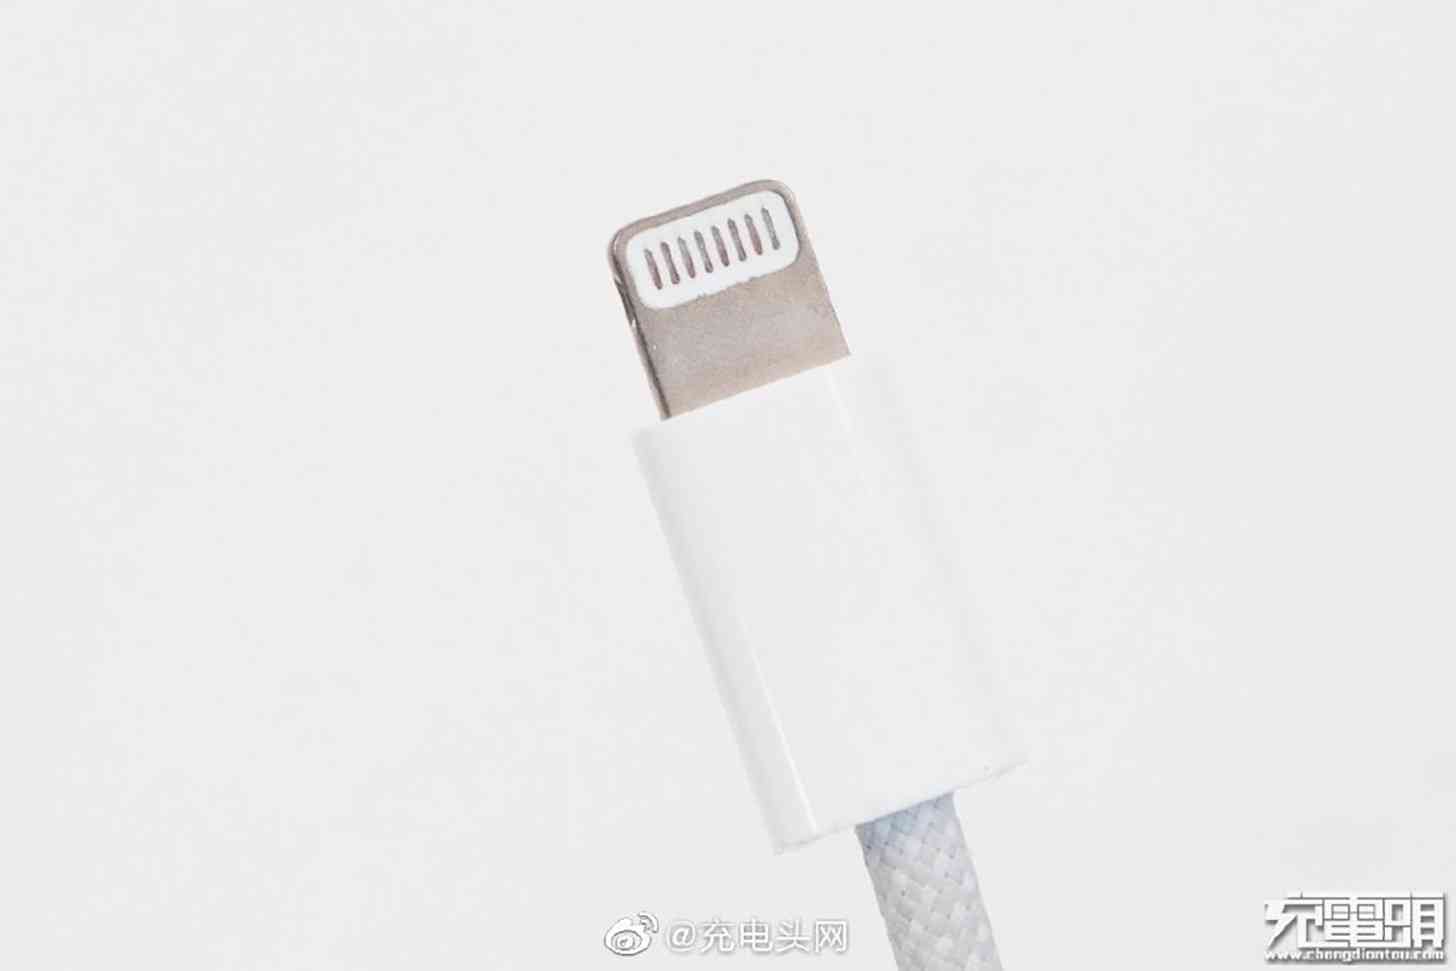 iPhone 12 braided Lightning to USB-C cable connectors